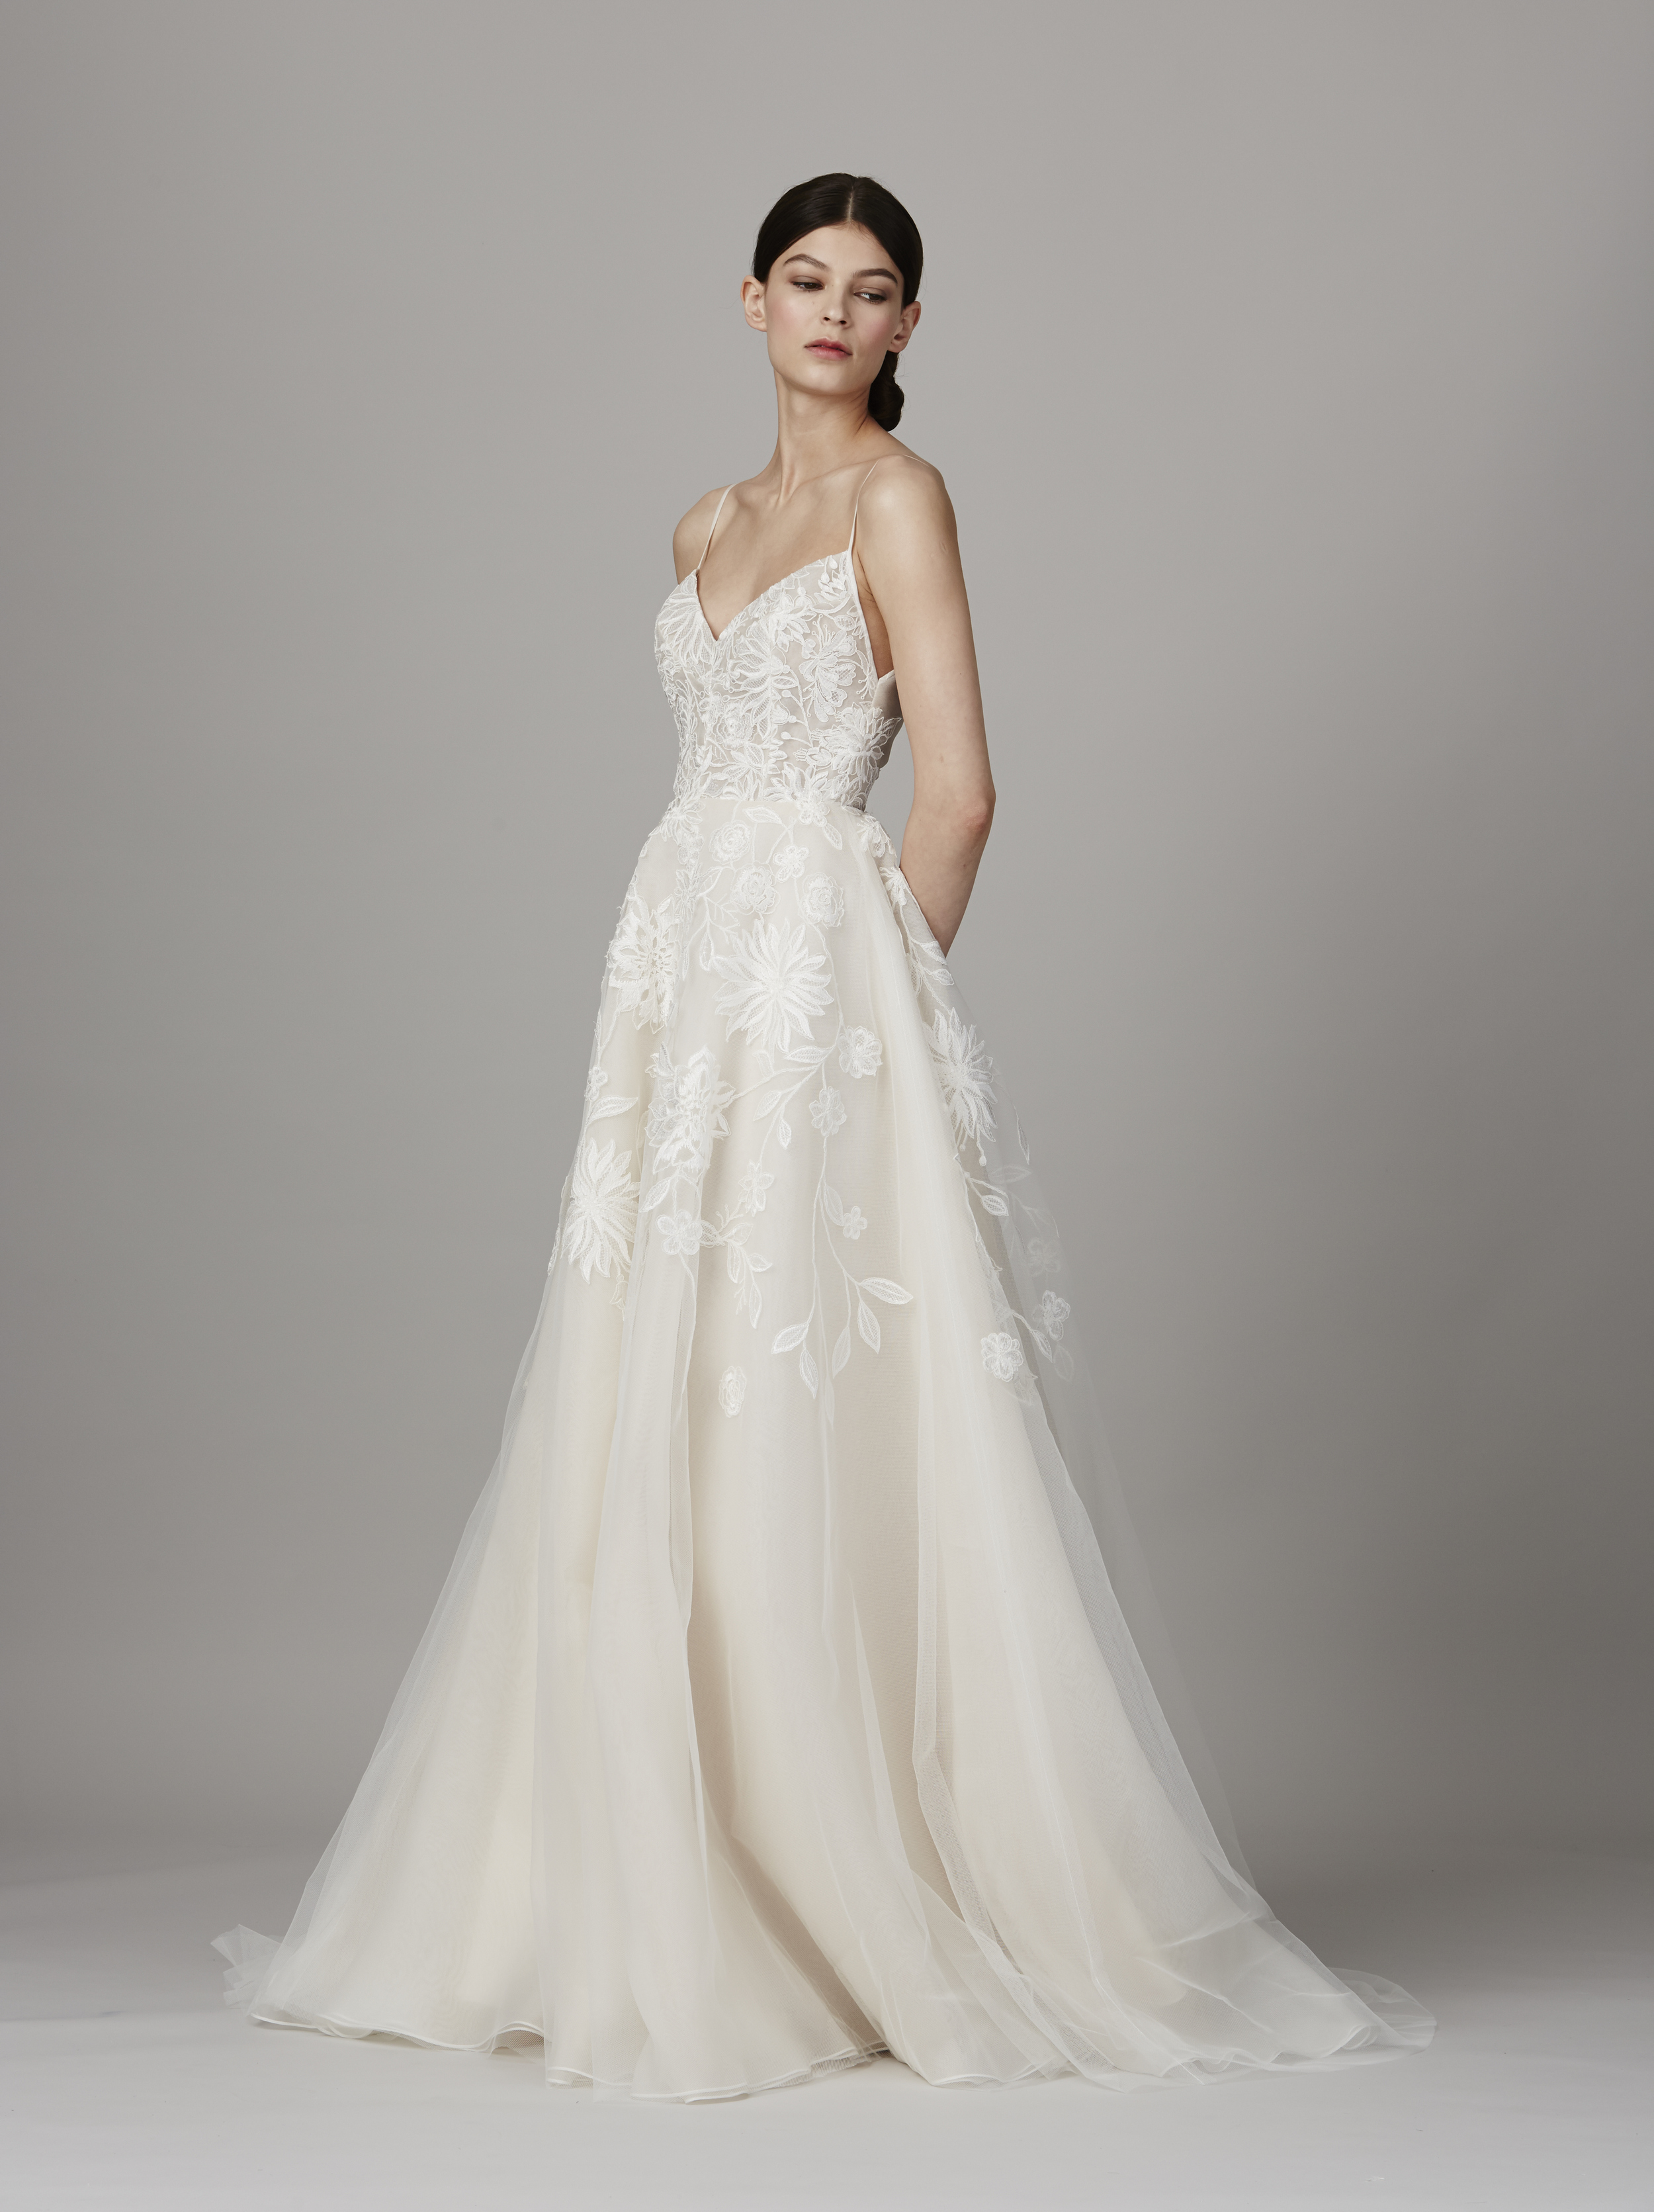  Lela Rose bridal collection | available in Colorado only at Little White Dress Bridal Shop, Denver 